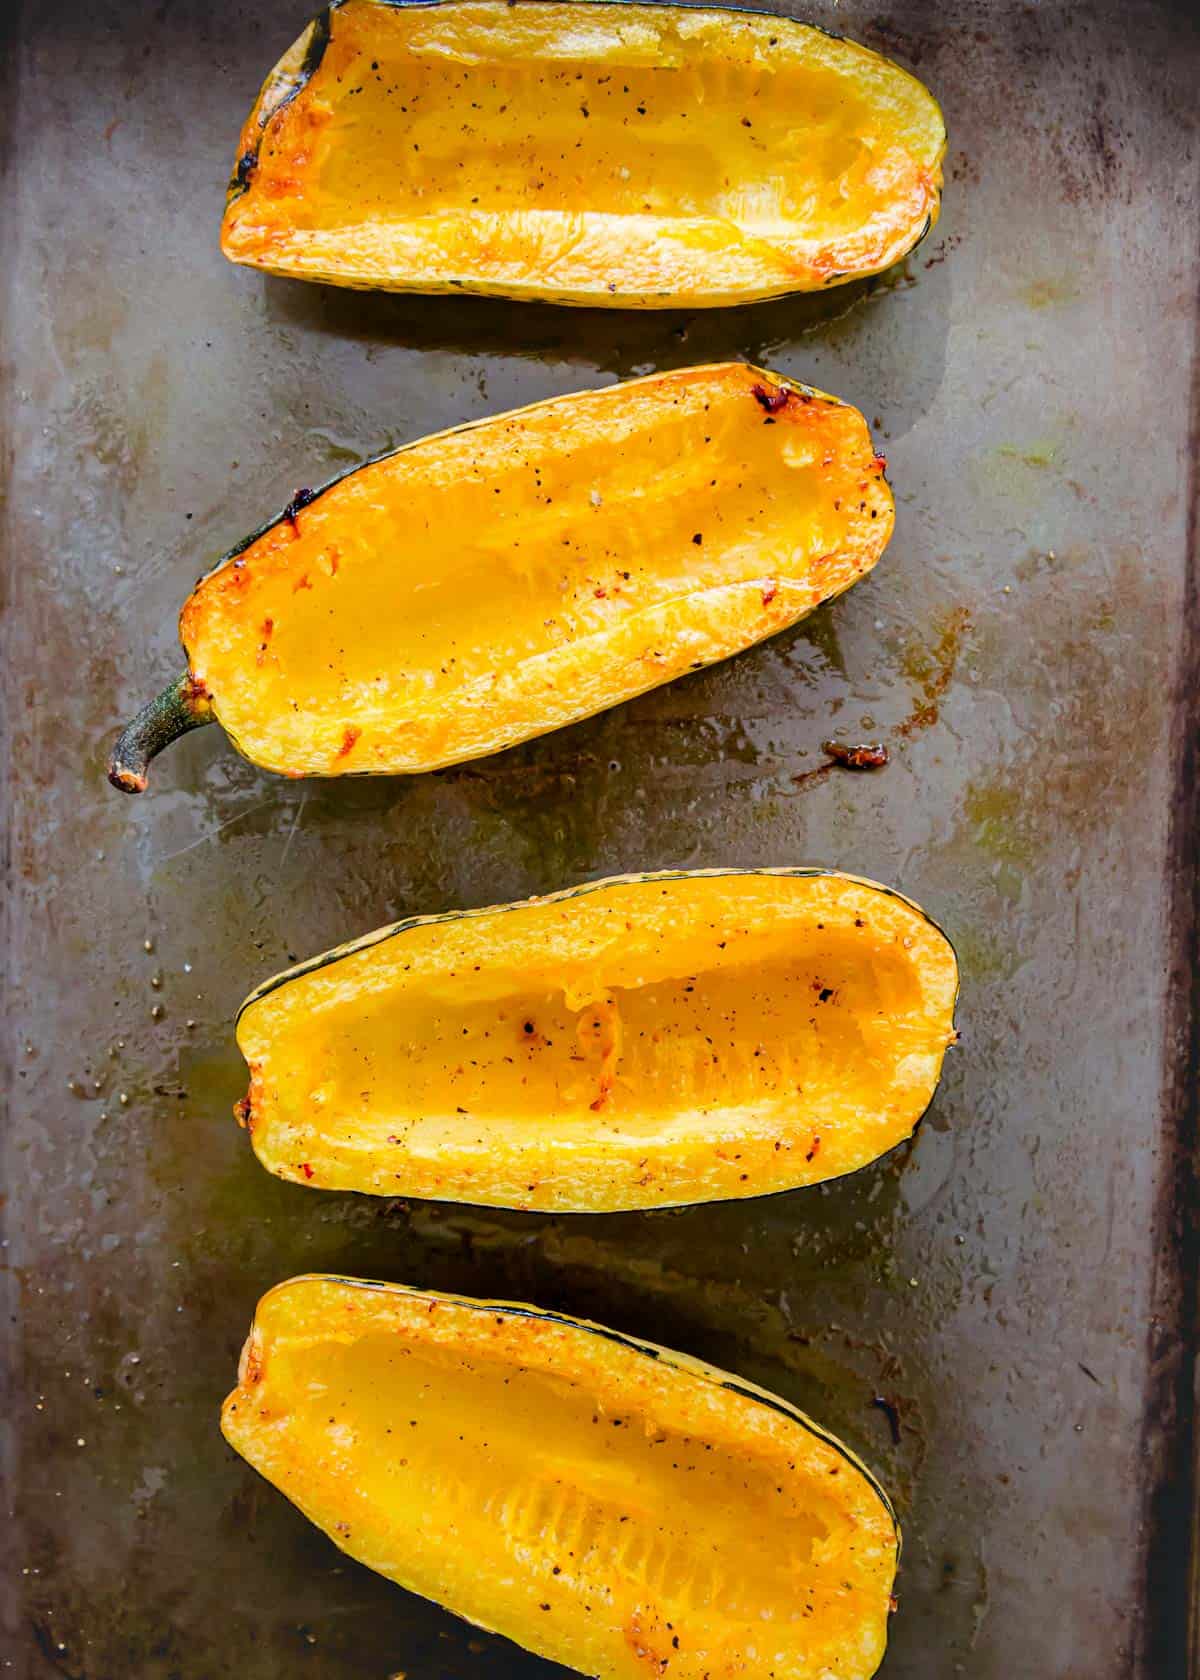 Oven roasted delicata squash cut in halves before stuffing.